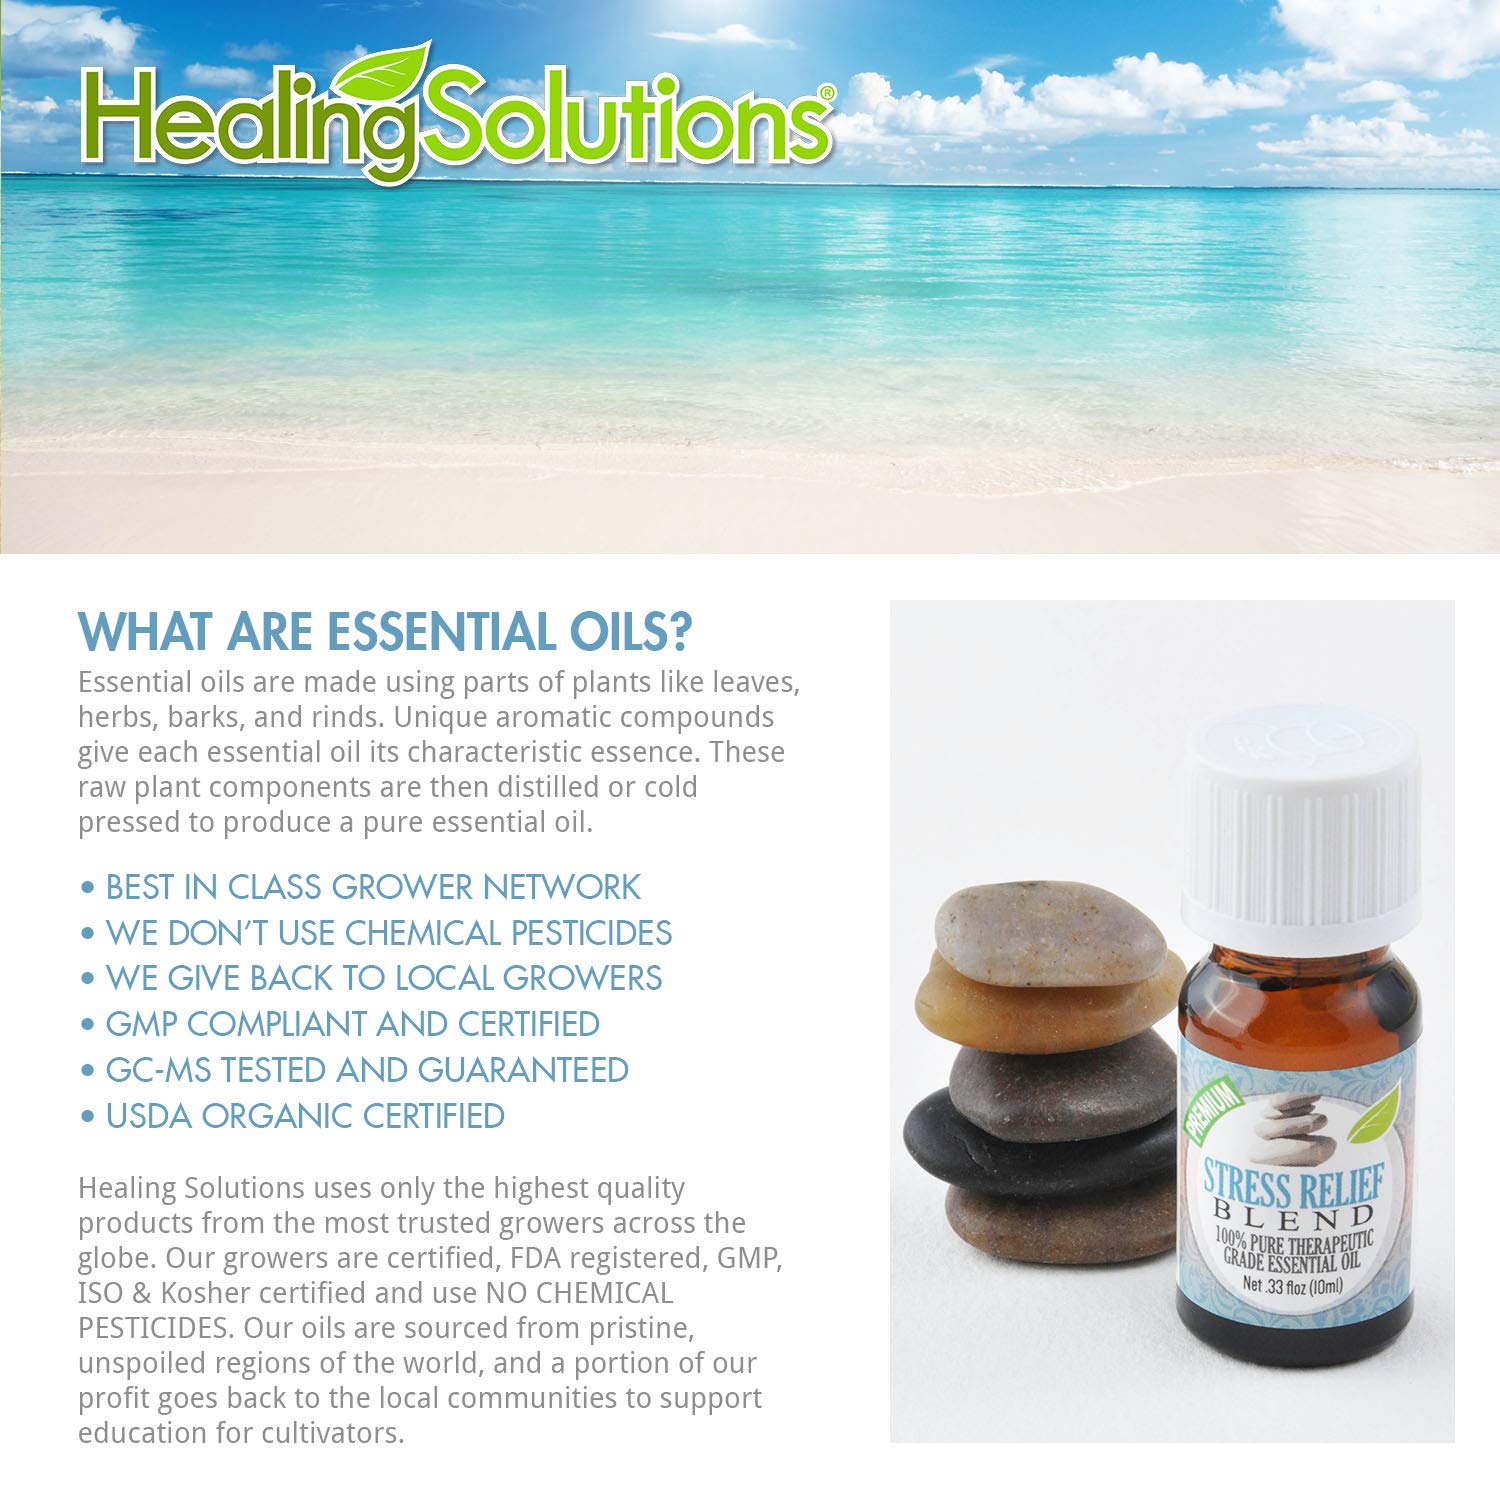 Healing Solutions Stress Relief Blend Essential Oil - 100% Pure Therapeutic Grade Stress Relief Blend Oil - 10ml